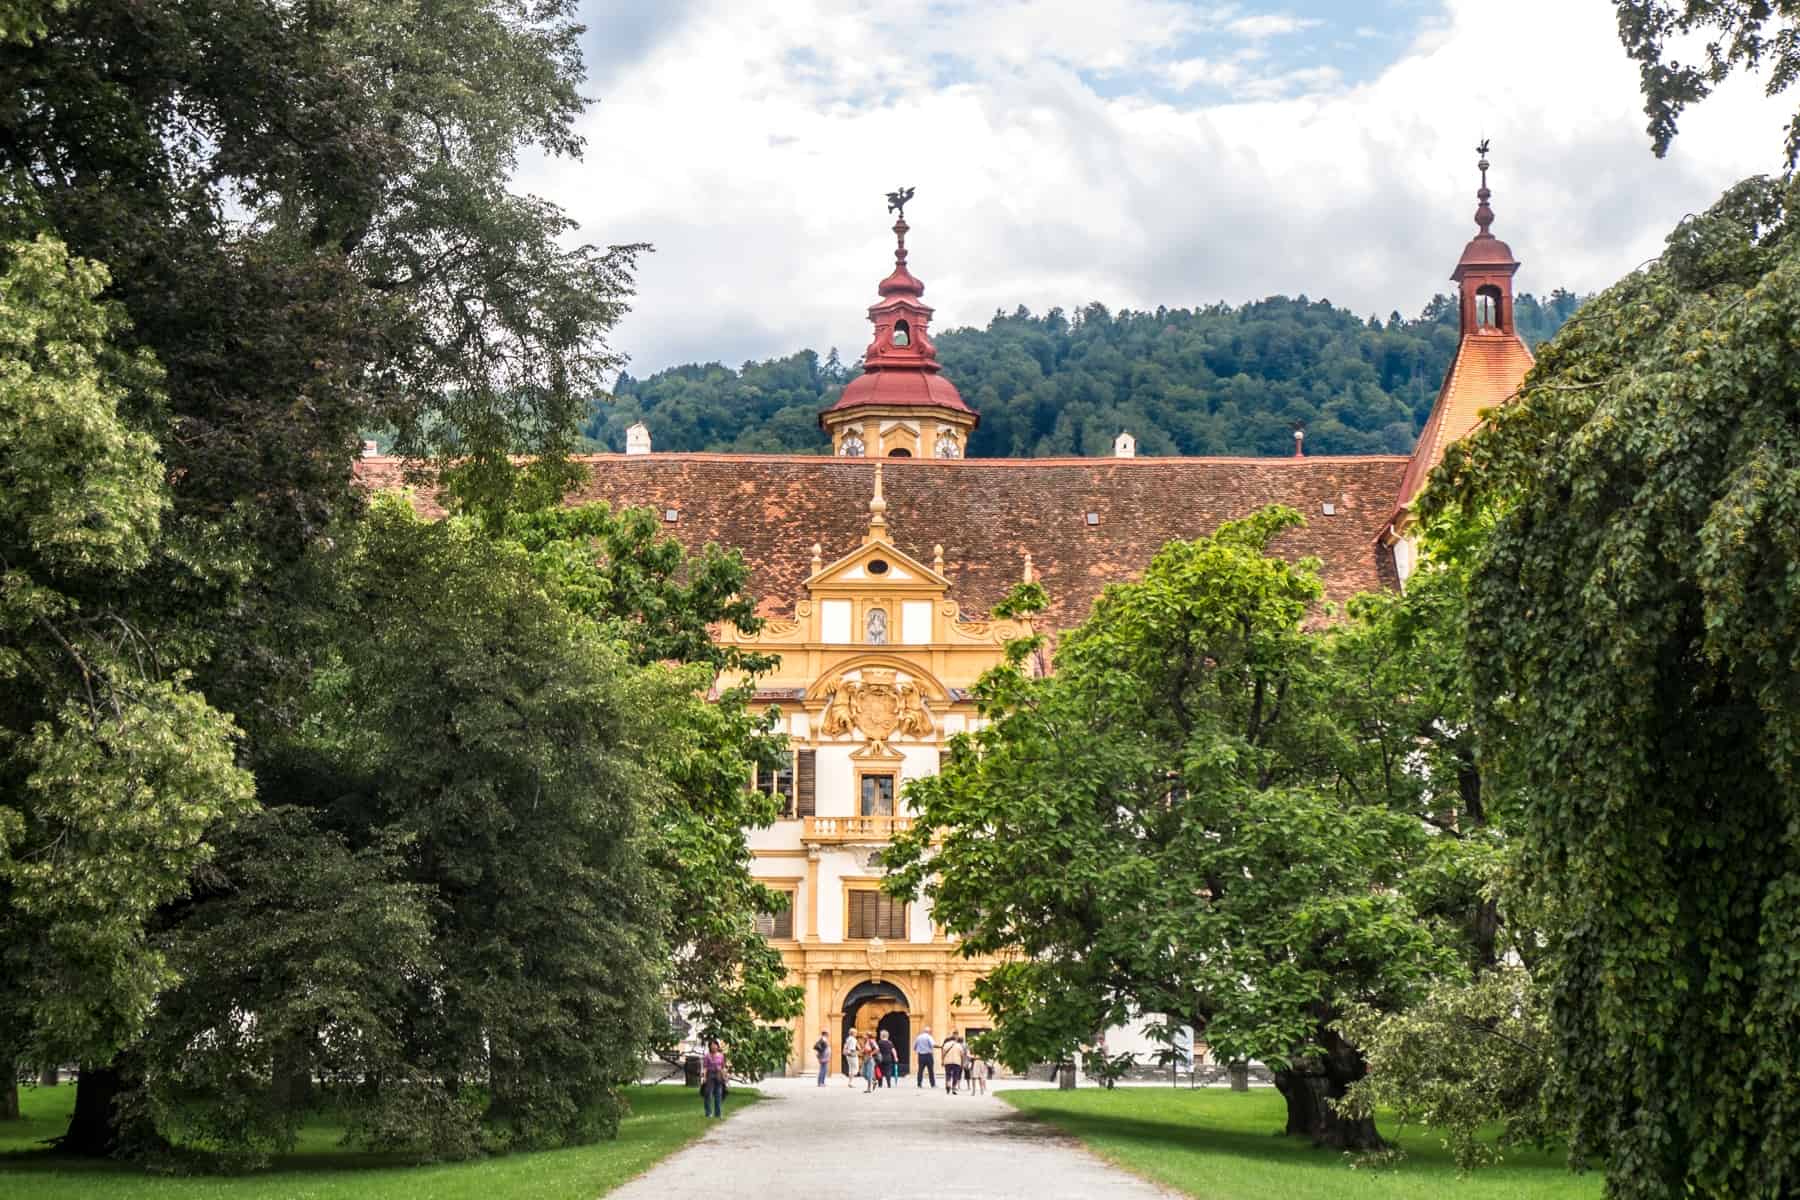 A pathway between think trees leads to an opulent golden yellow, red-roofed building - the entrance to the UNESCO World Heritage Site of Schloss Eggenberg in Graz